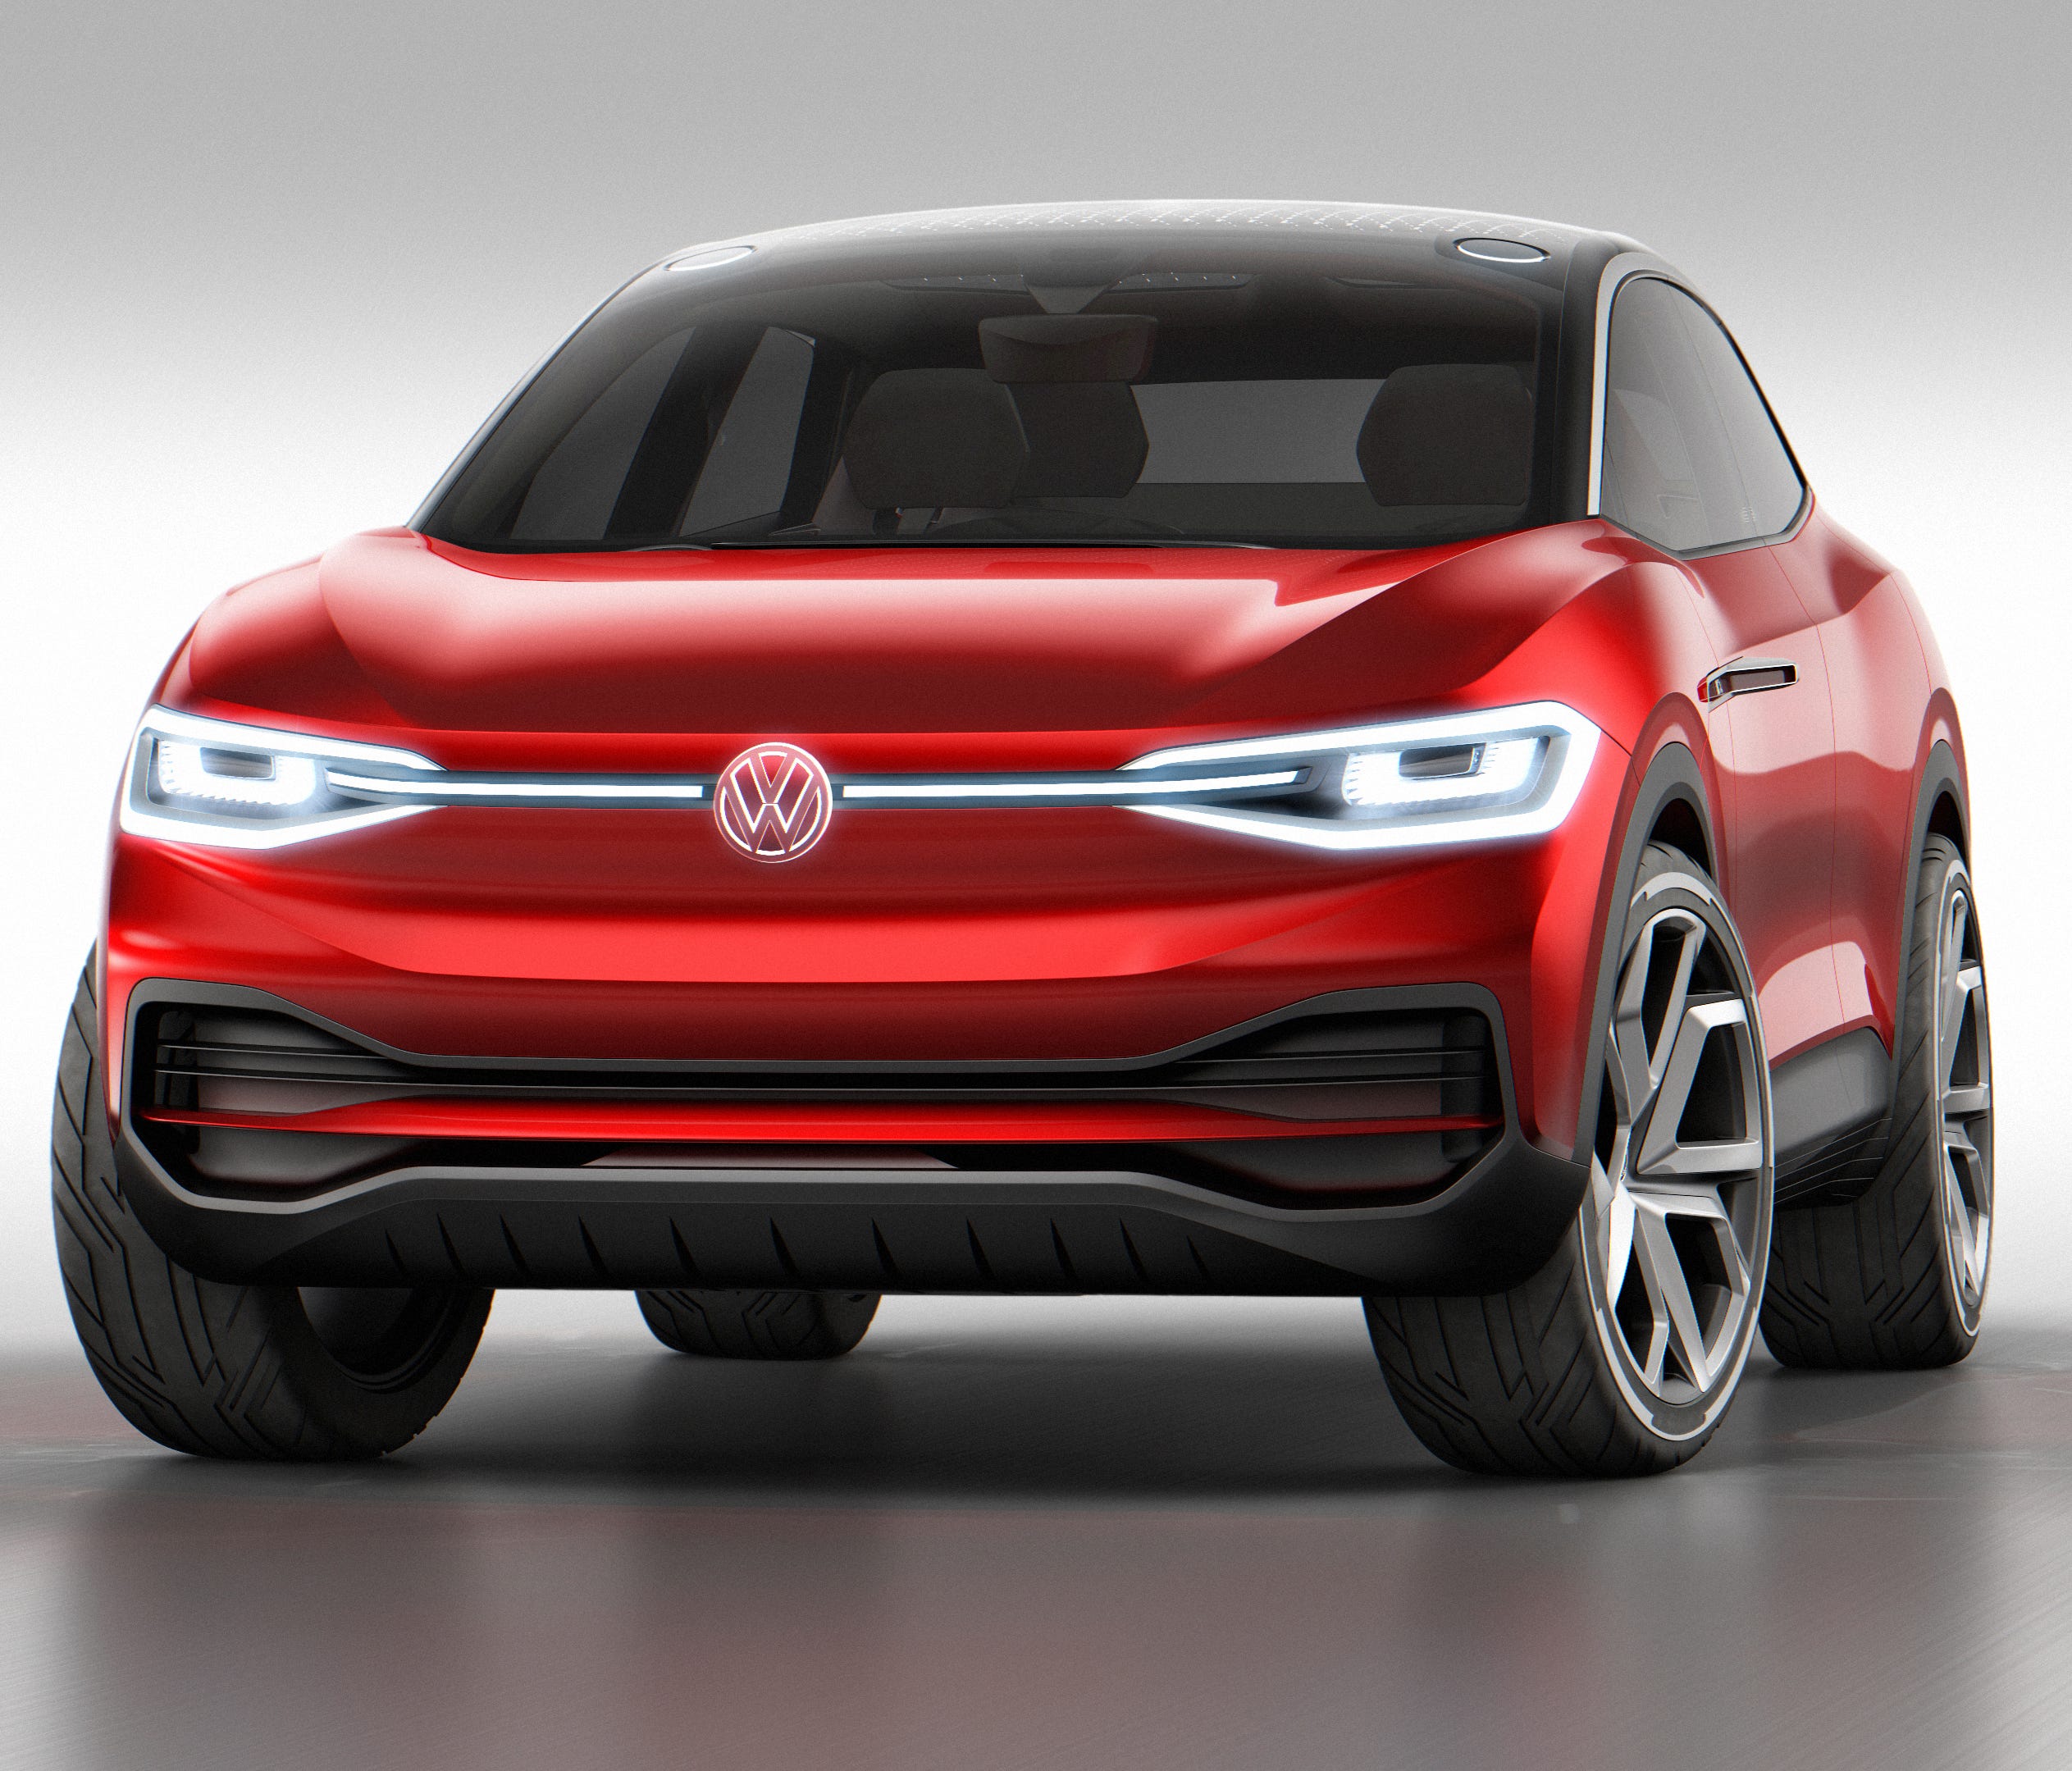 The Volkswagen I.D. Crozz sport-utility vehicle is an electric concept. The production version will begin manufacturing in  2020.